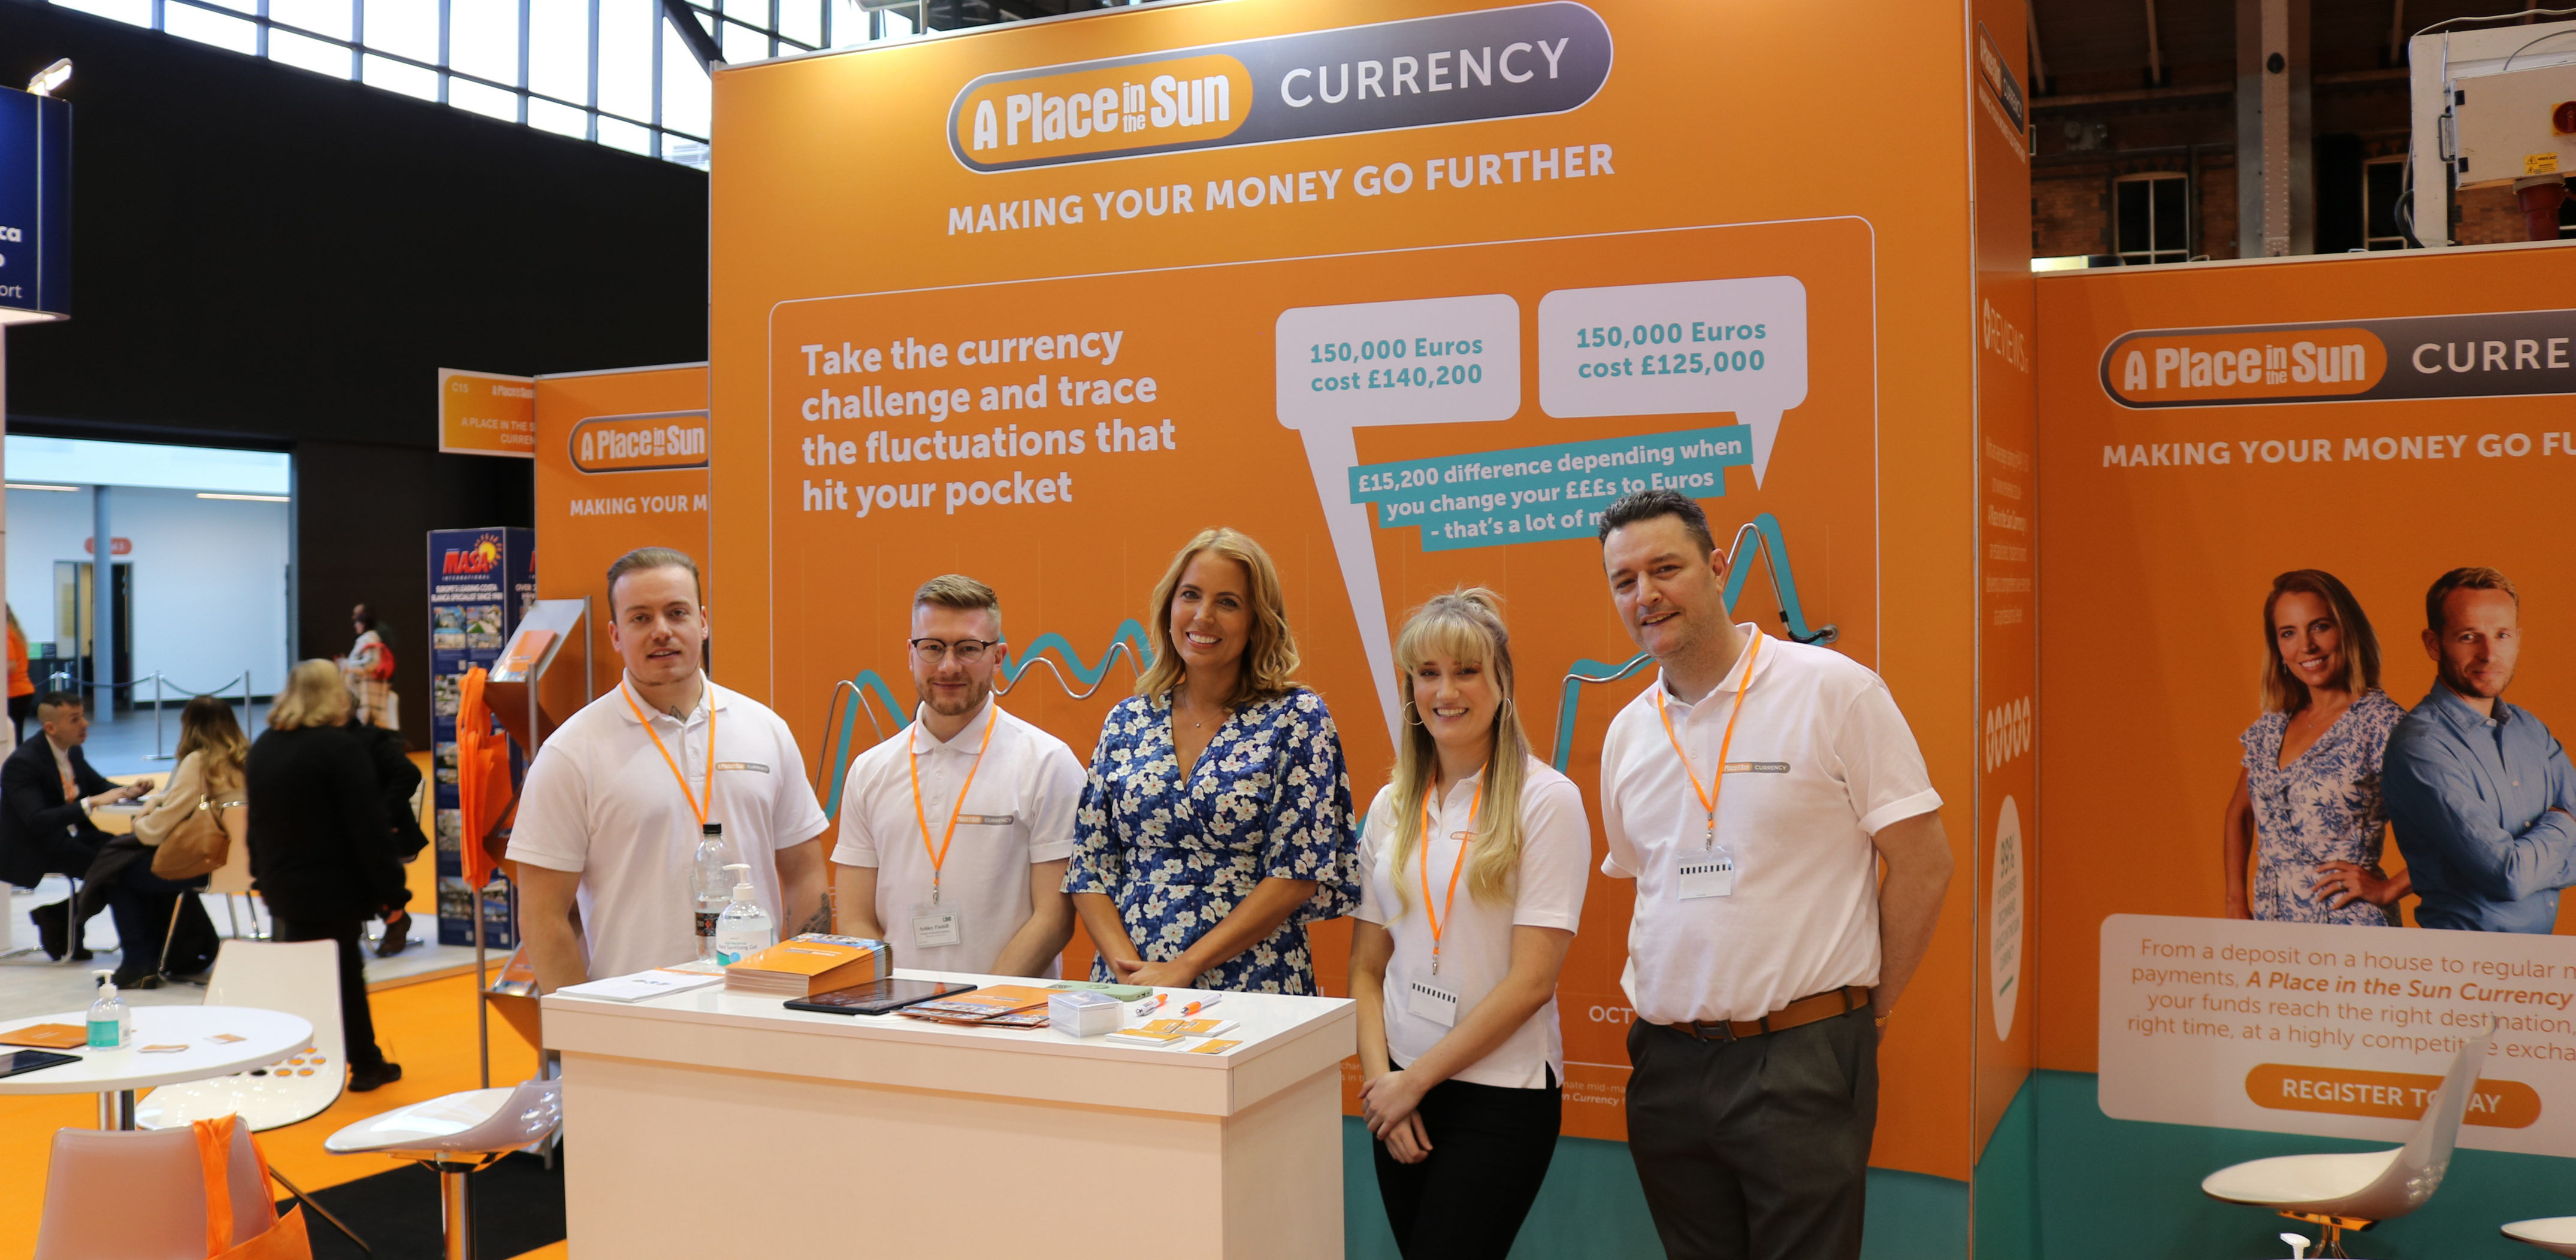 Jasmine Harman with the A Place in the Sun Currency team